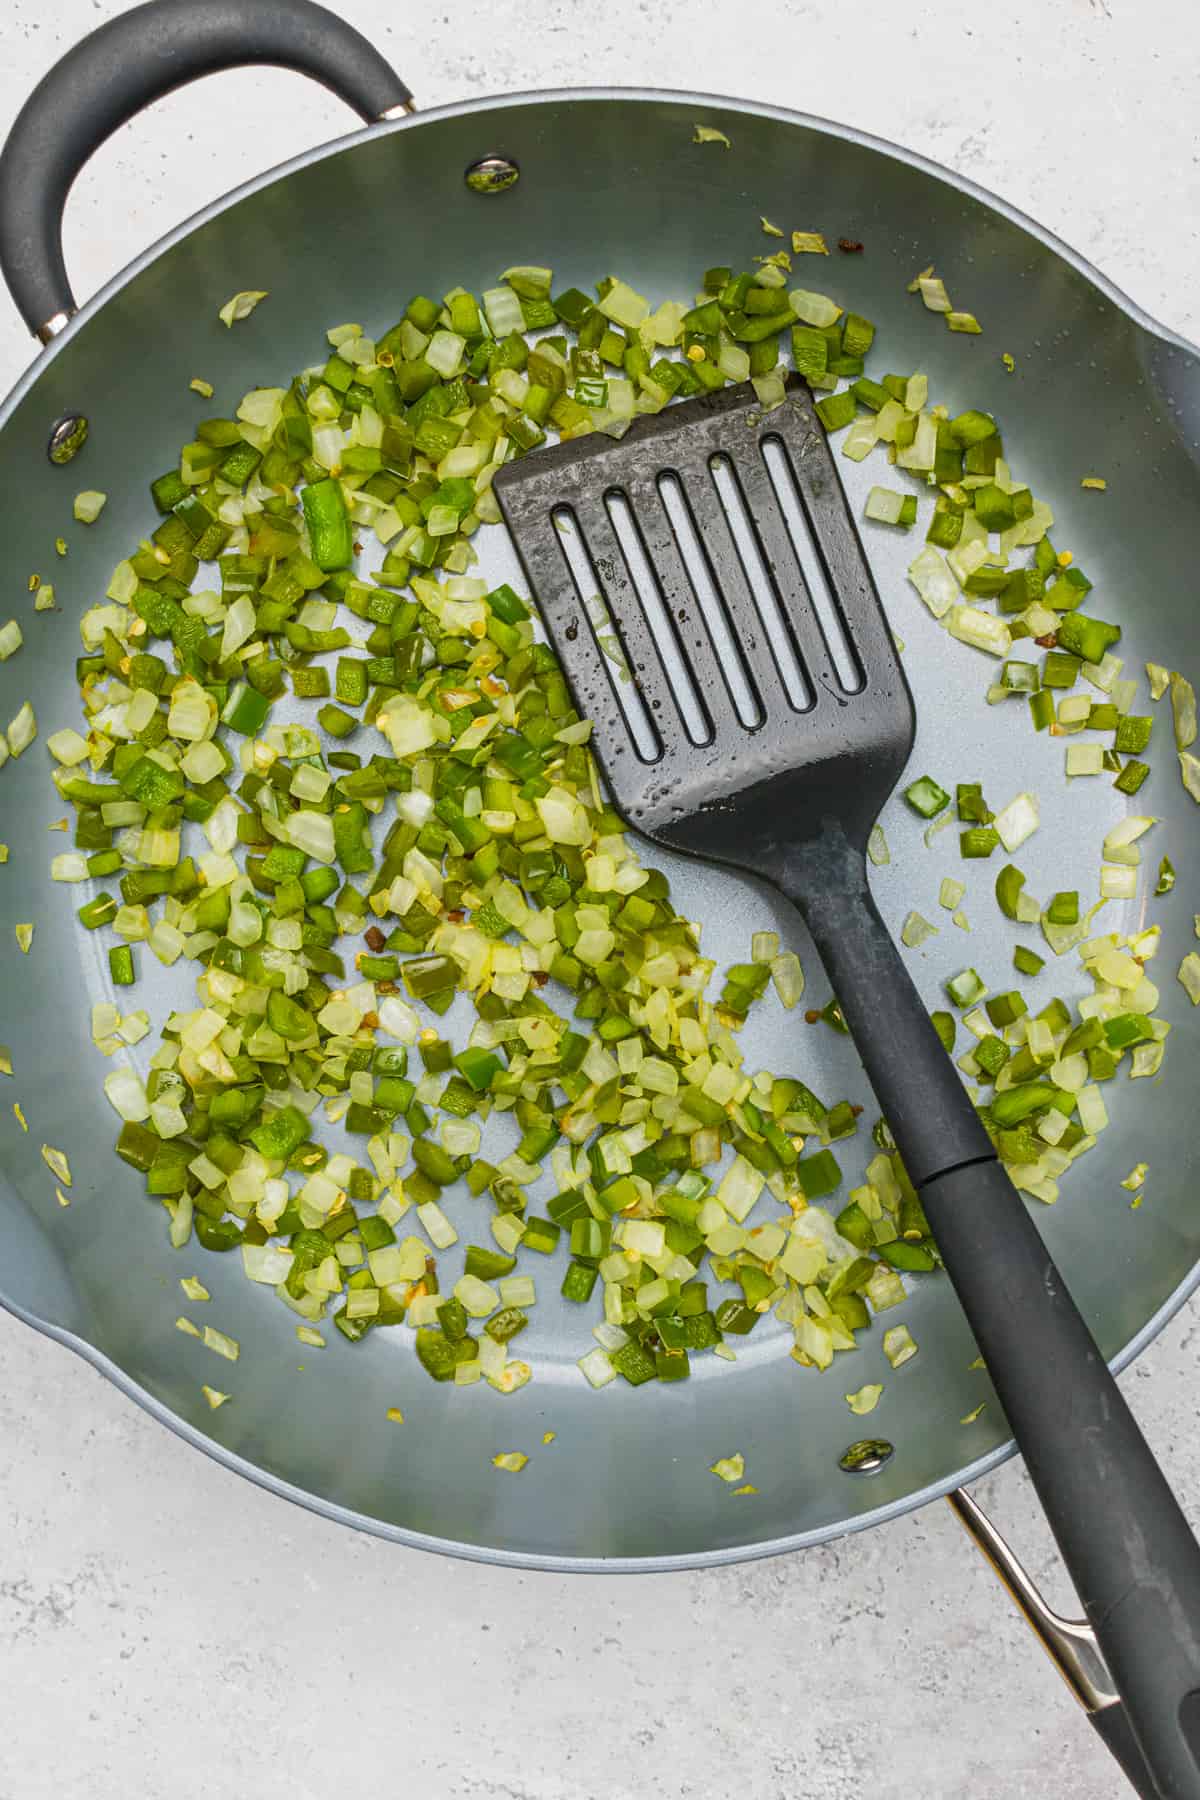 Chopped onions and green peppers sauteing in a skillet for Savory Breakfast Muffins.